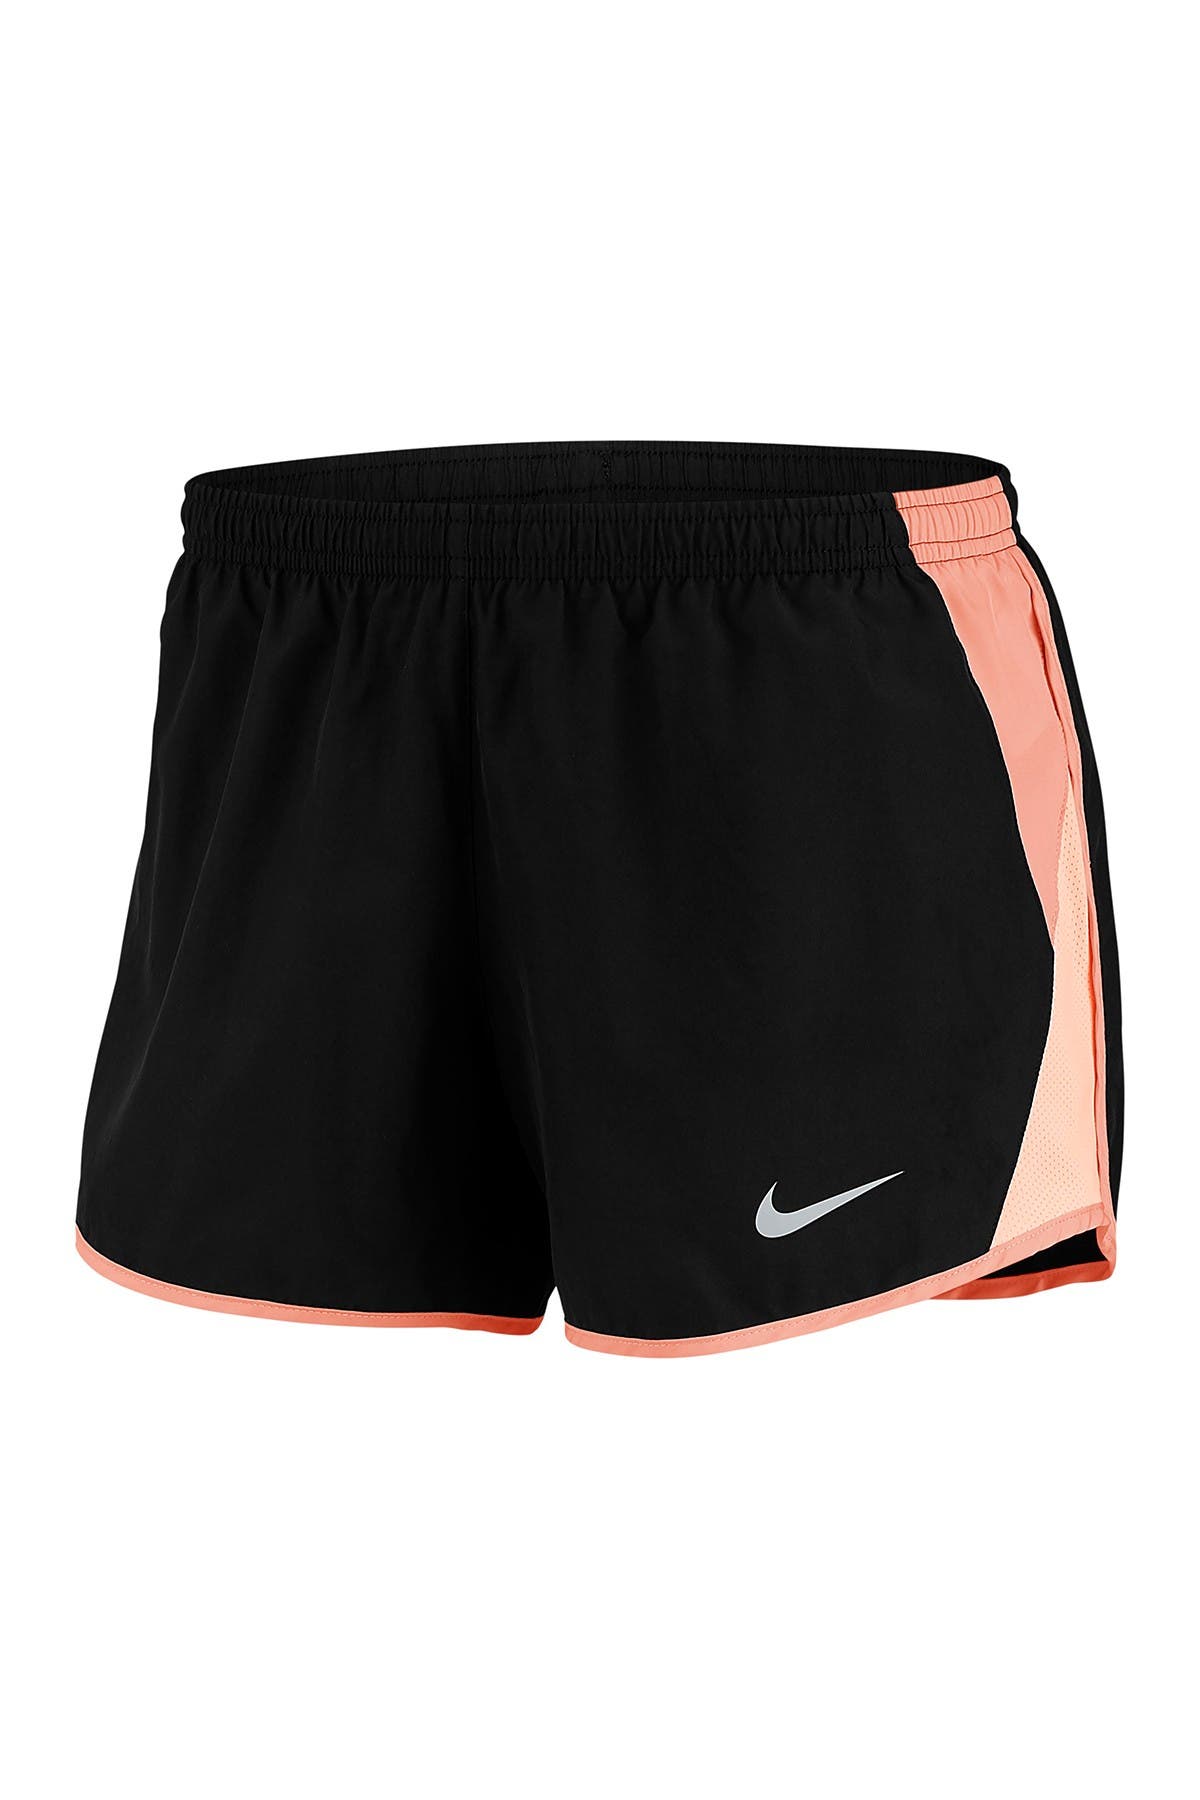 nike short outfits